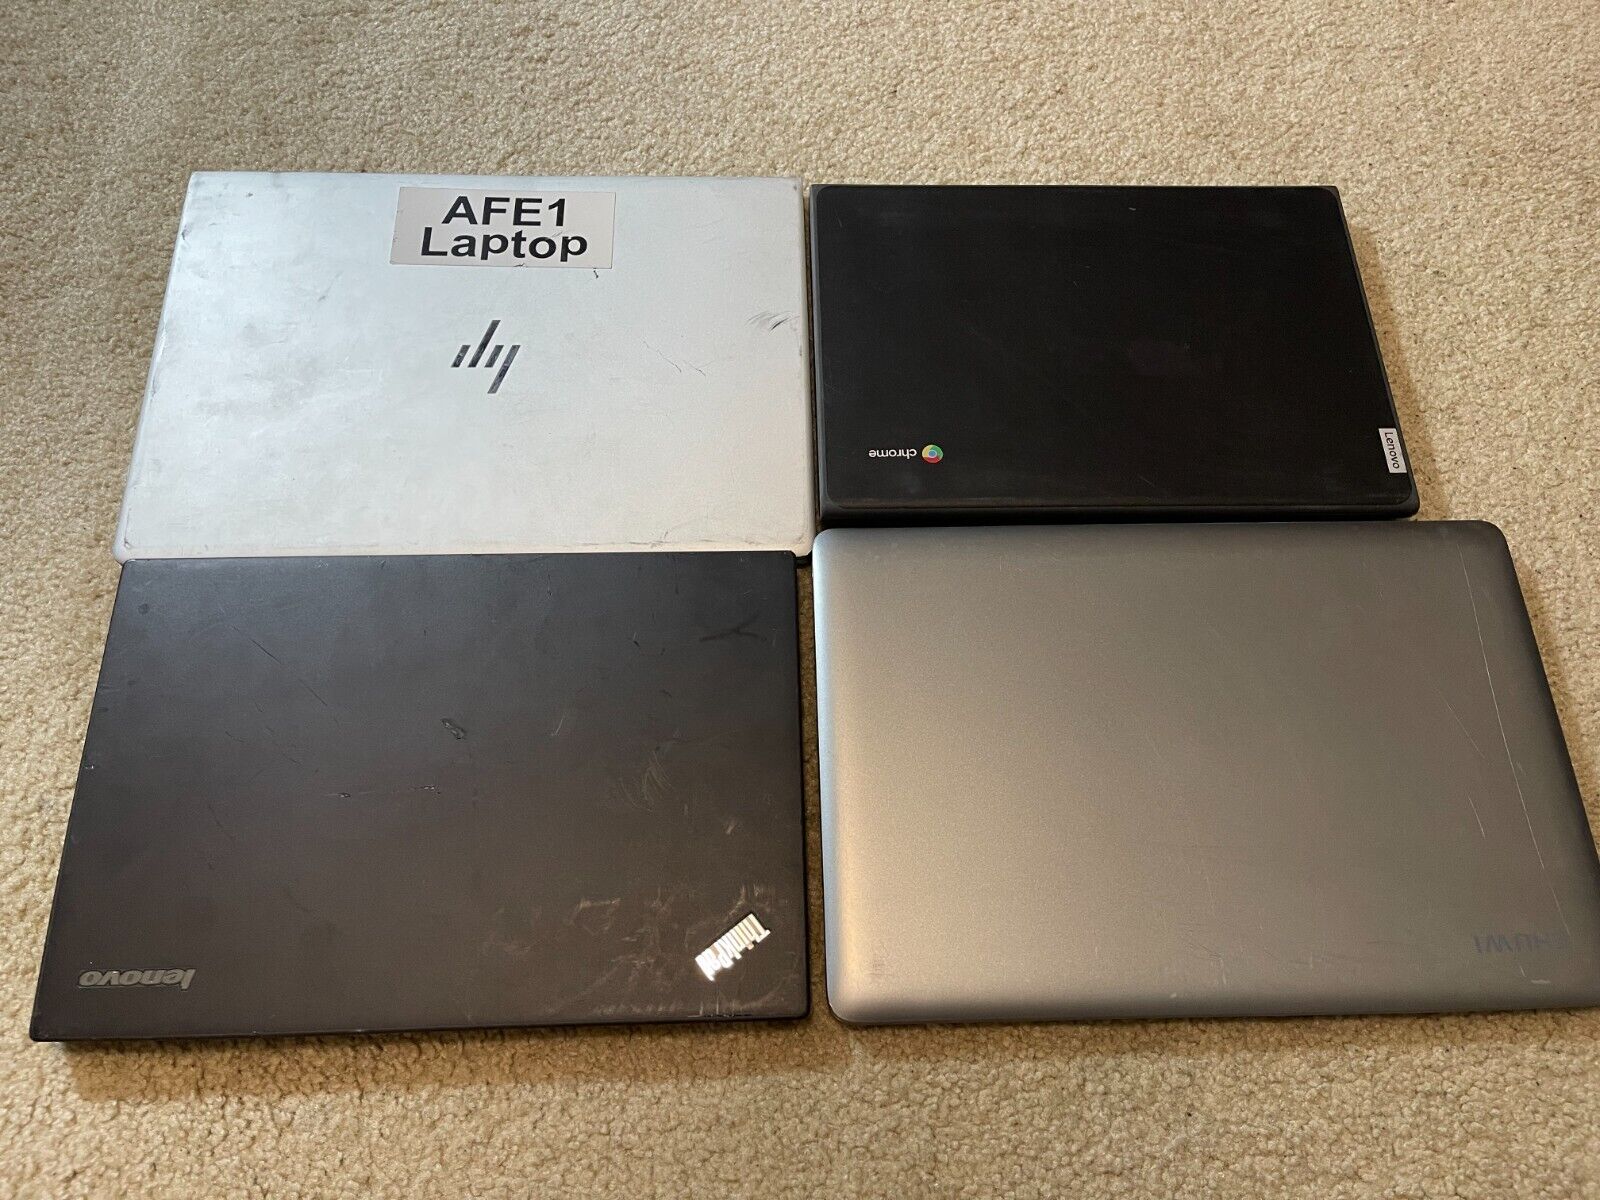 Lot of 4 laptops - 1x HP, 1x Misc, 2x Lenovo, Untested As Is